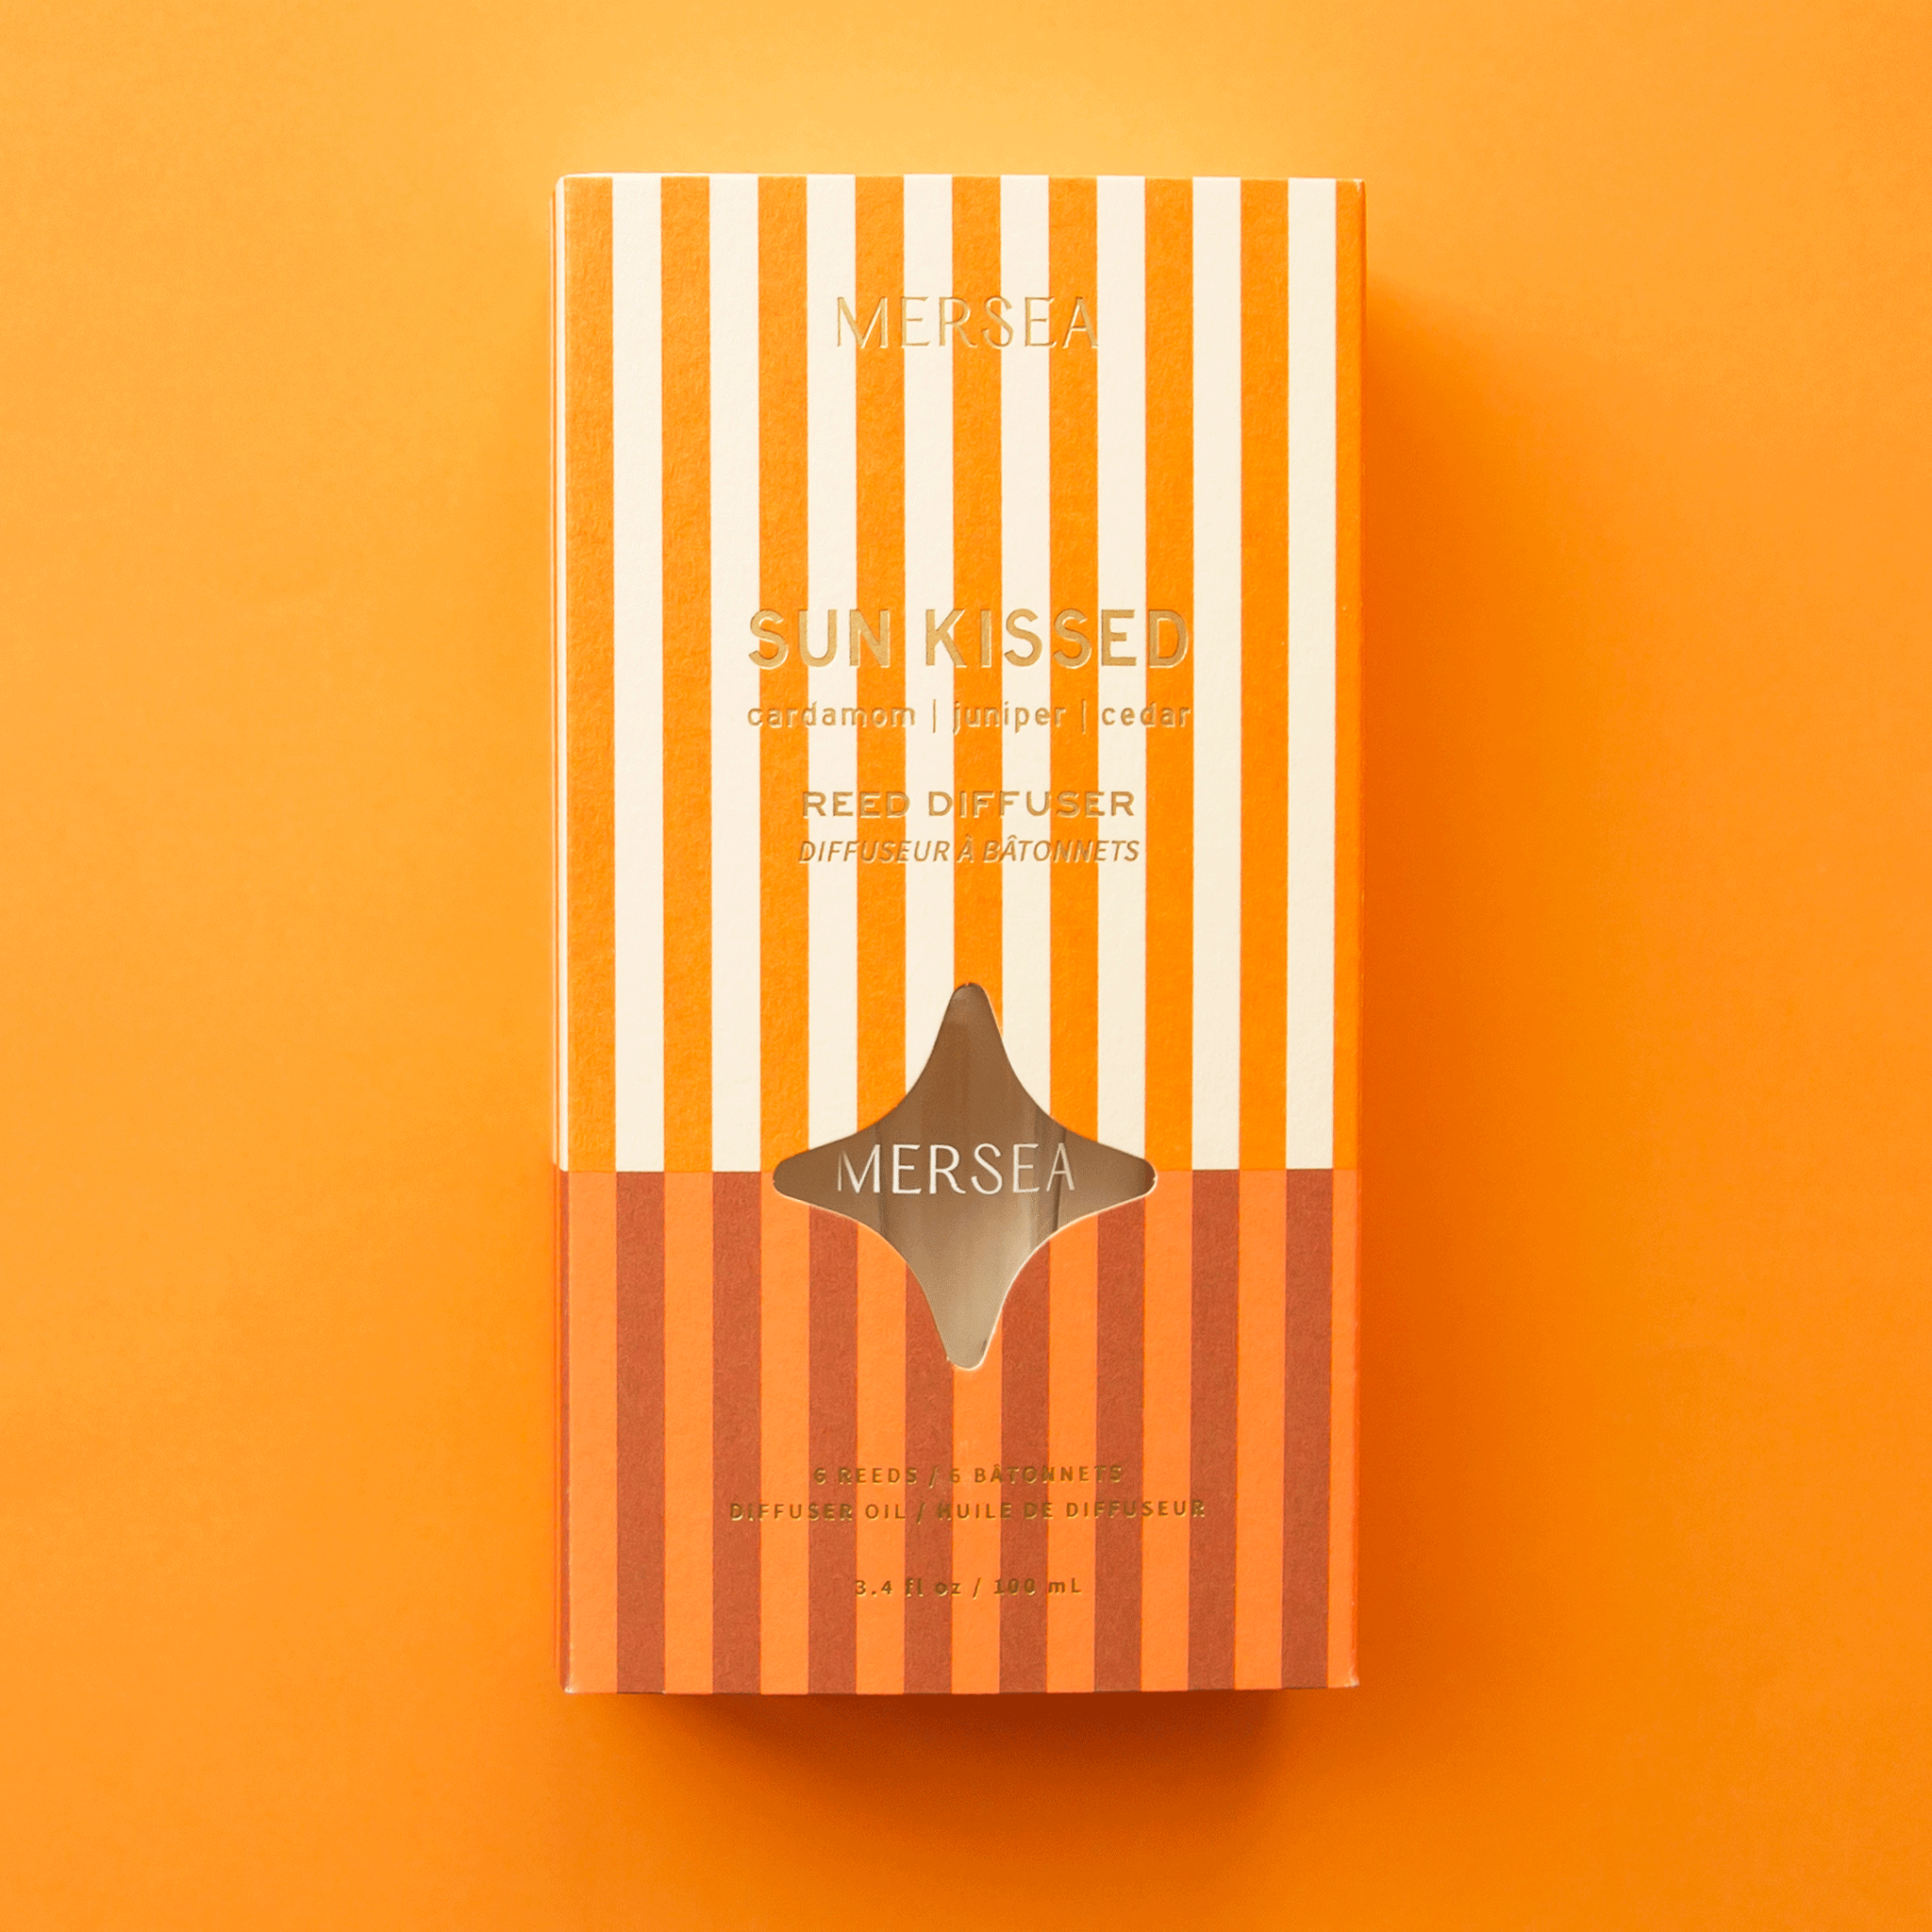 On an orange background is an orange and white striped box filled with a reed diffuser. 